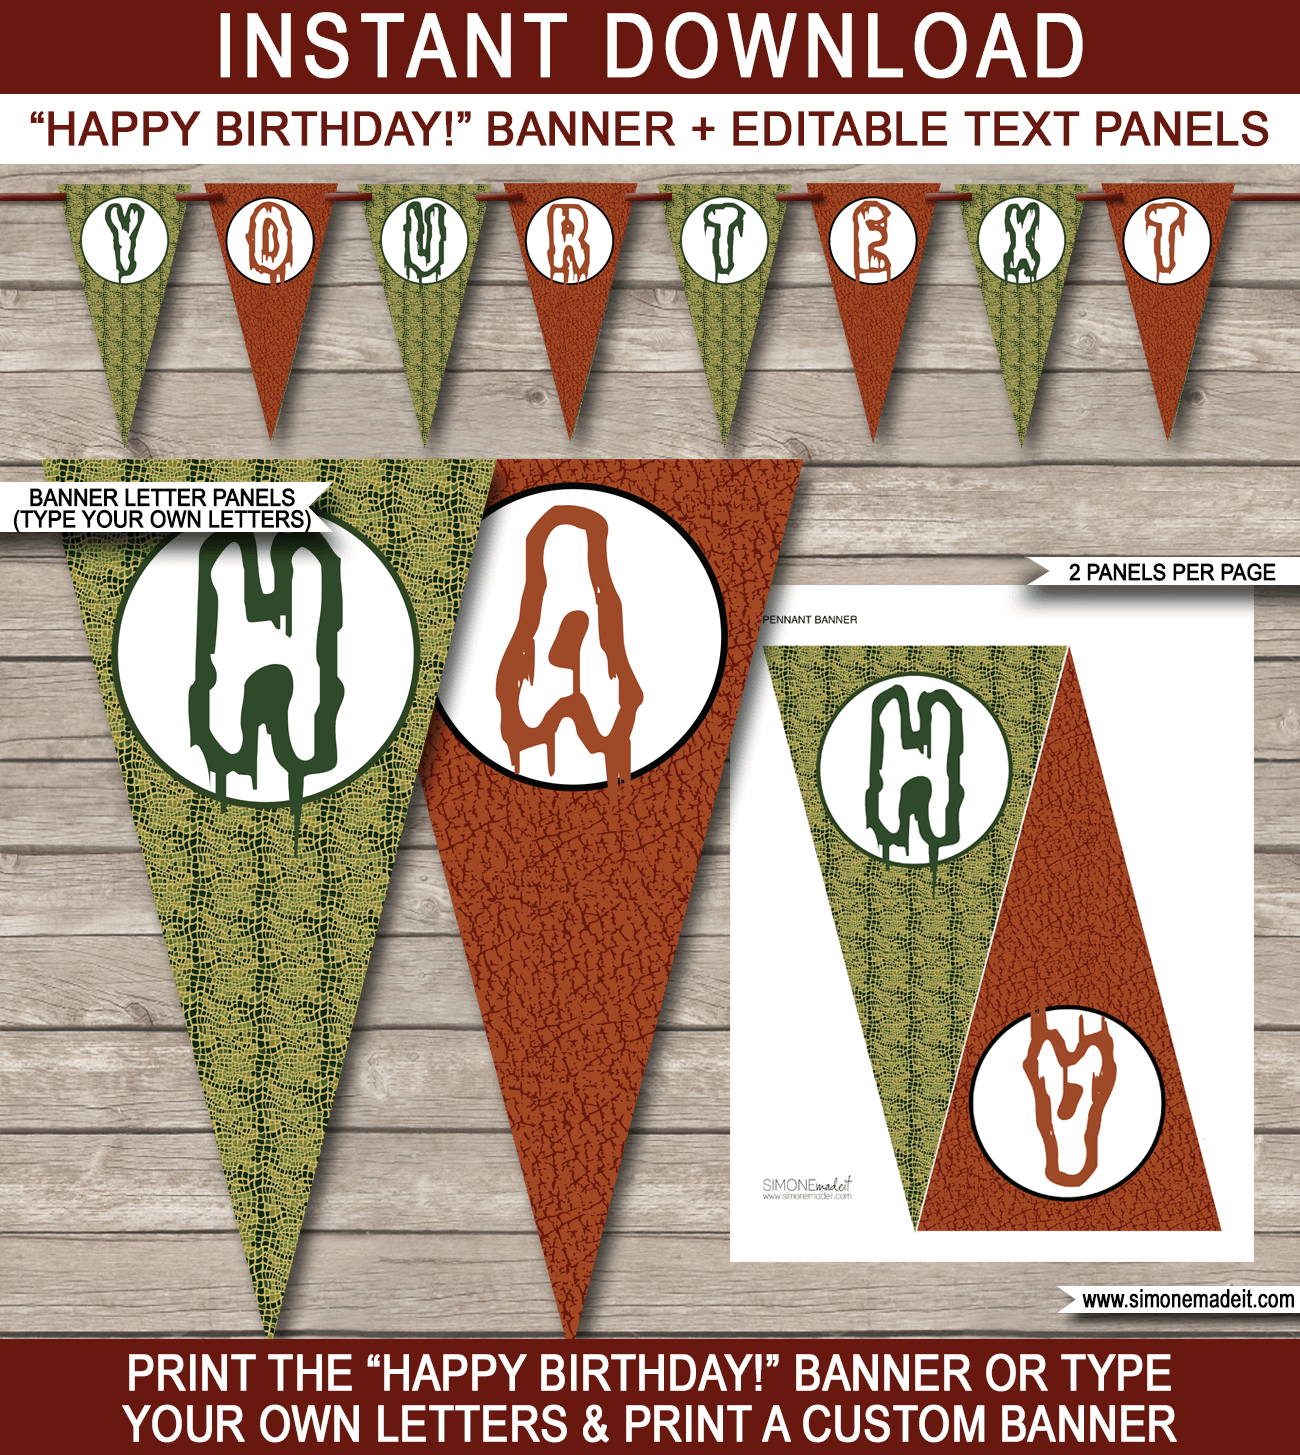 Swamp Party Banner Template - Happy Birthday Bunting Pennants - Editable and Printable DIY Template - INSTANT DOWNLOAD $4.50 via simonemadeit.com